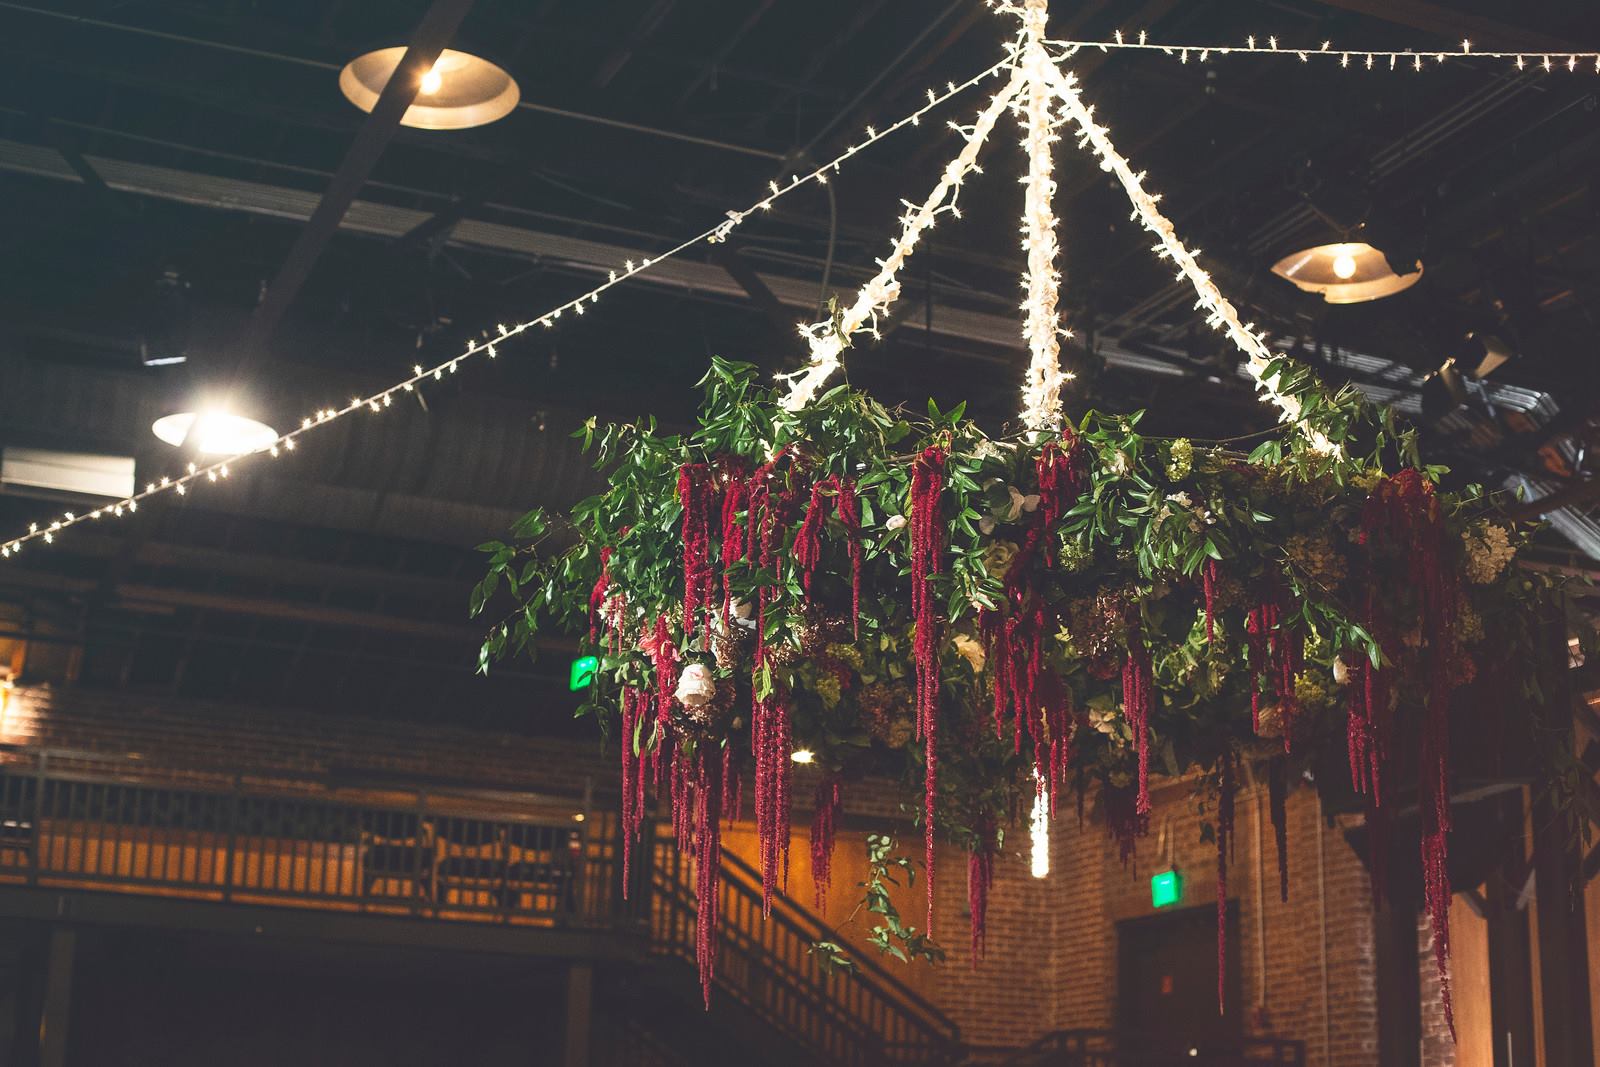 43750364 2073889099338589 4977020880132505600 o Planning a private event in Birmingham? Here's how Iron City can help